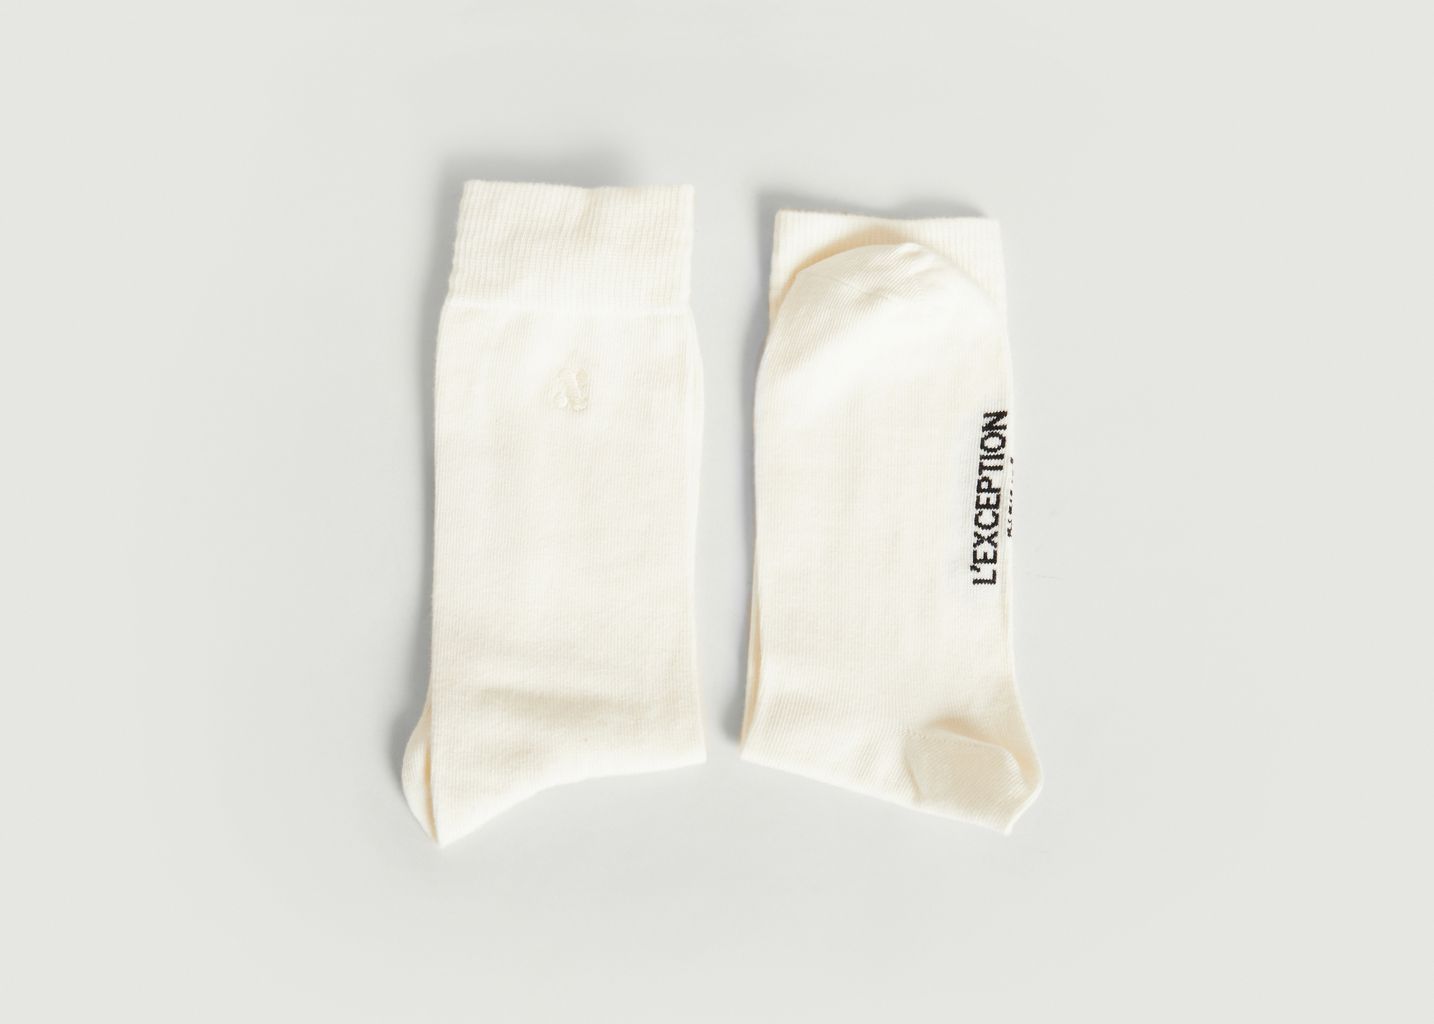 Embroidered socks - L'Exception Paris